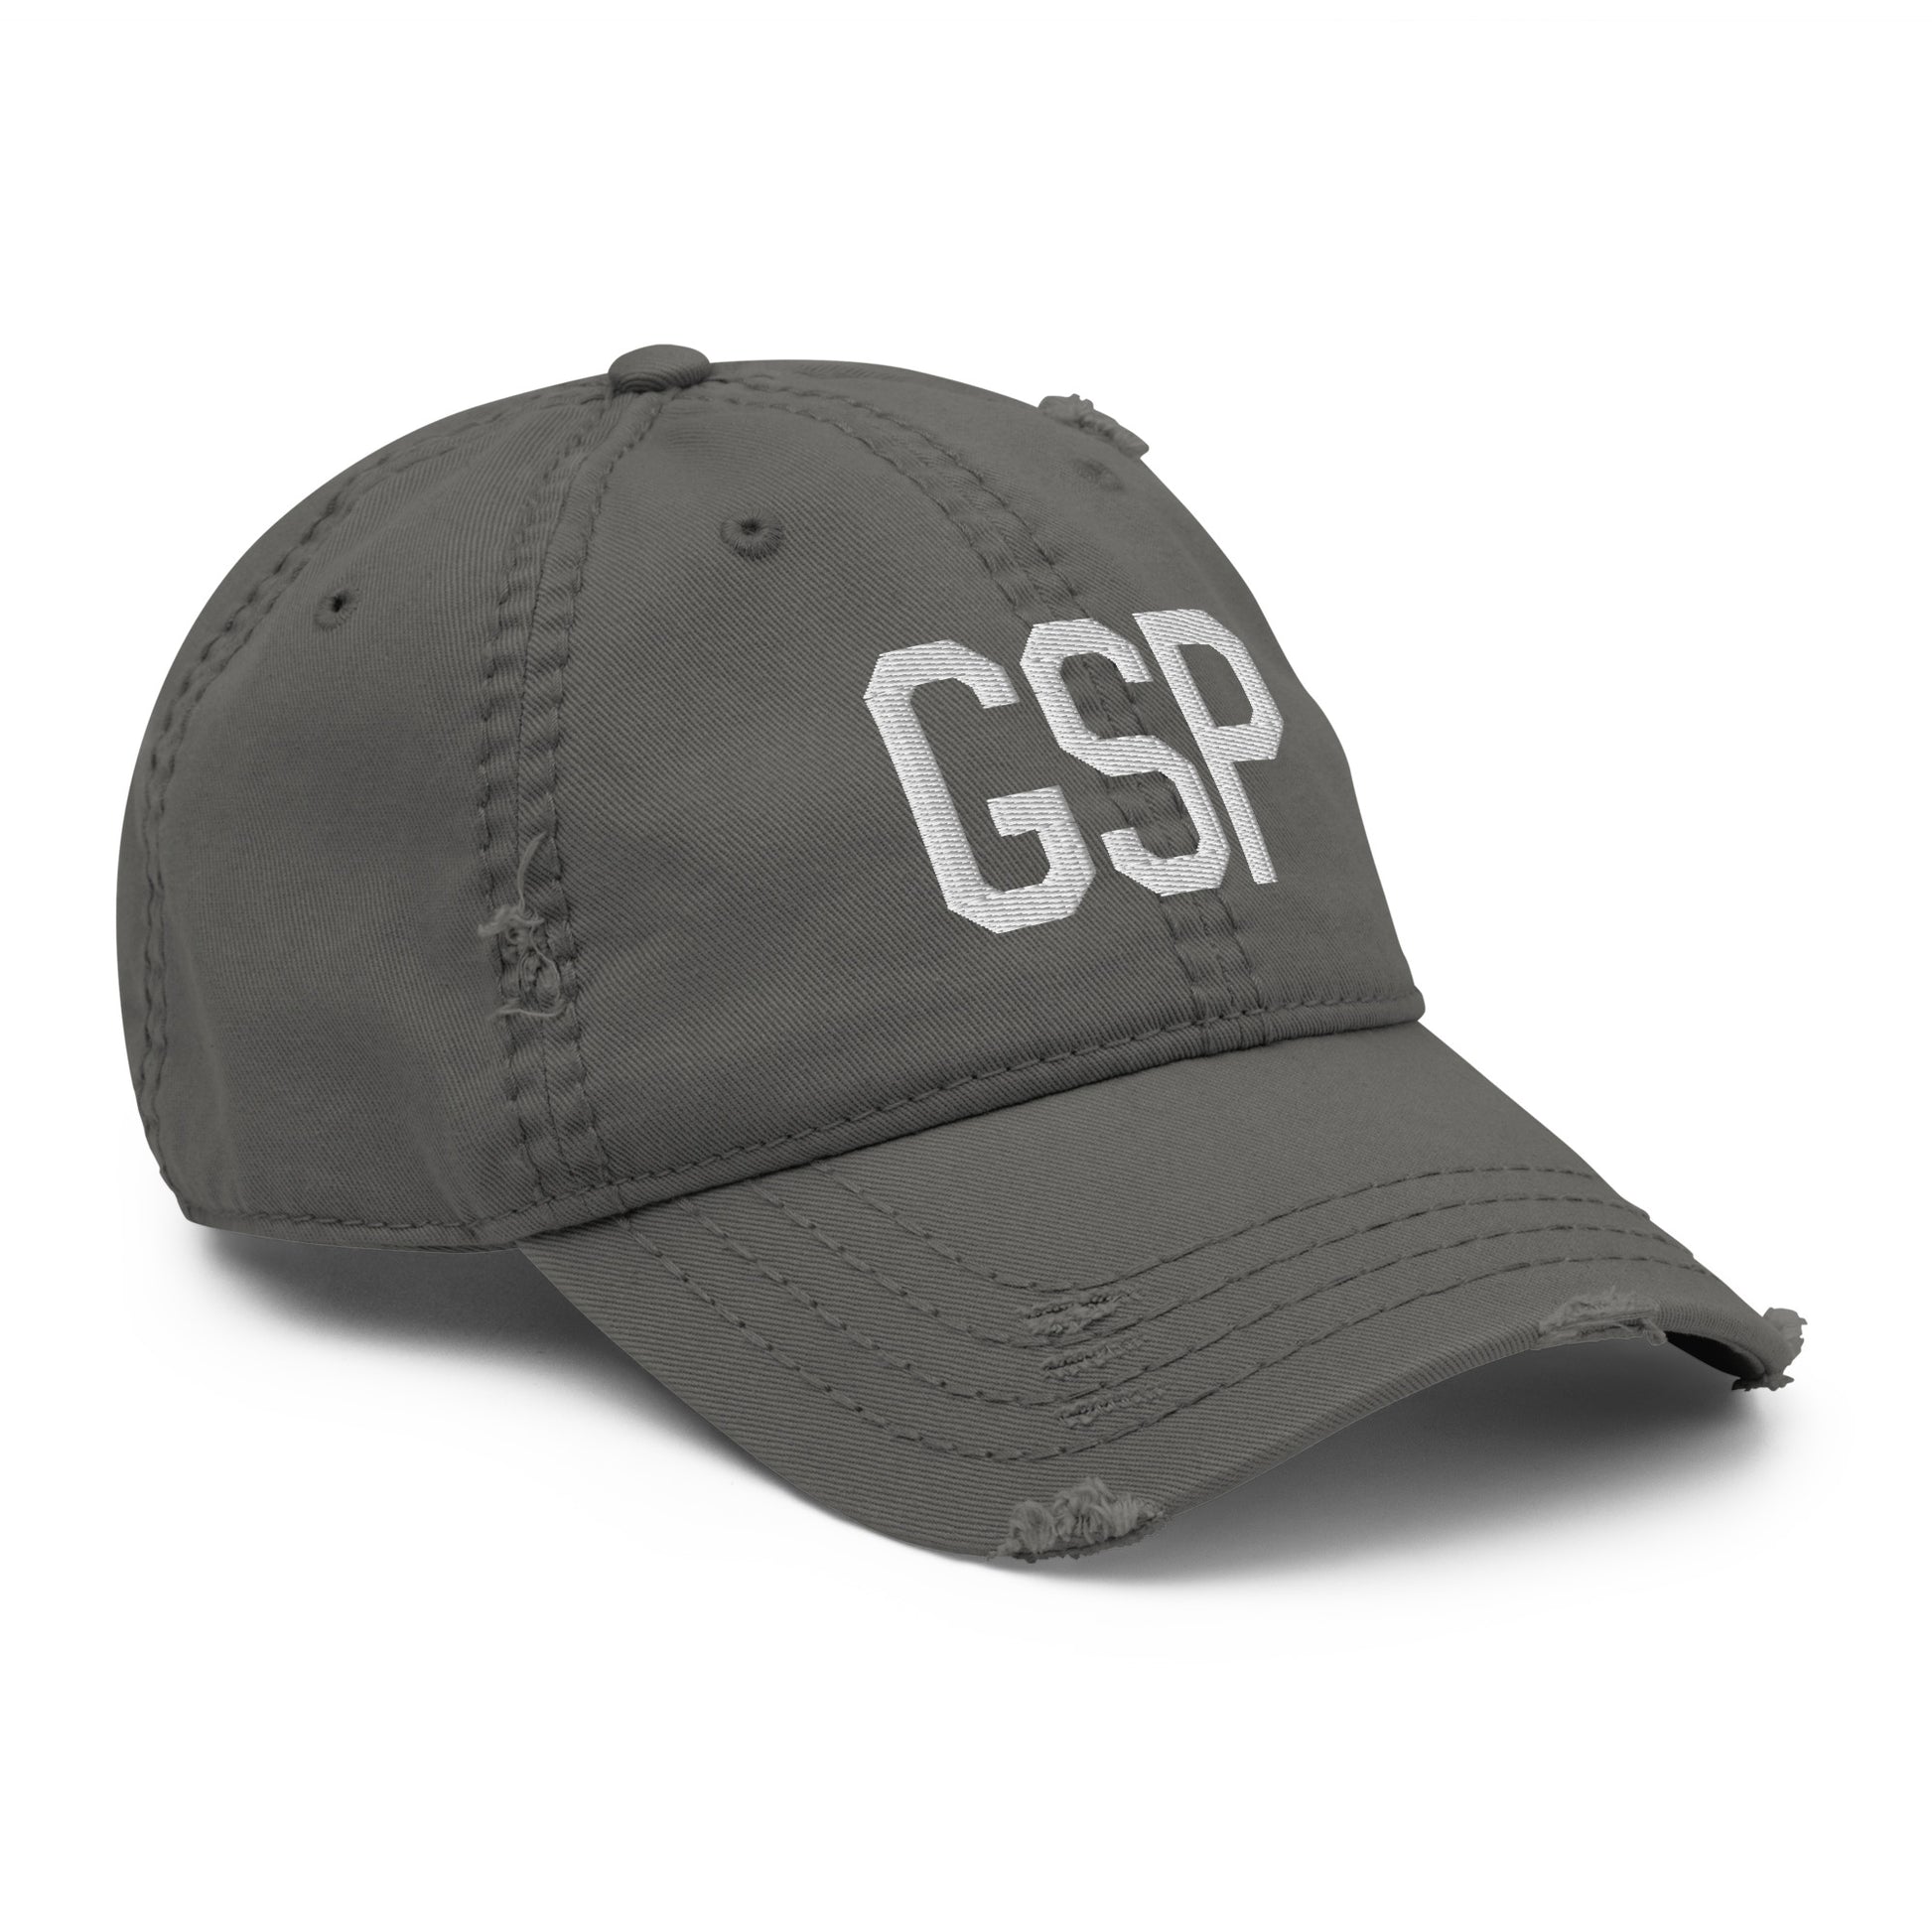 Airport Code Distressed Hat - White • GSP Greenville-Spartanburg • YHM Designs - Image 17